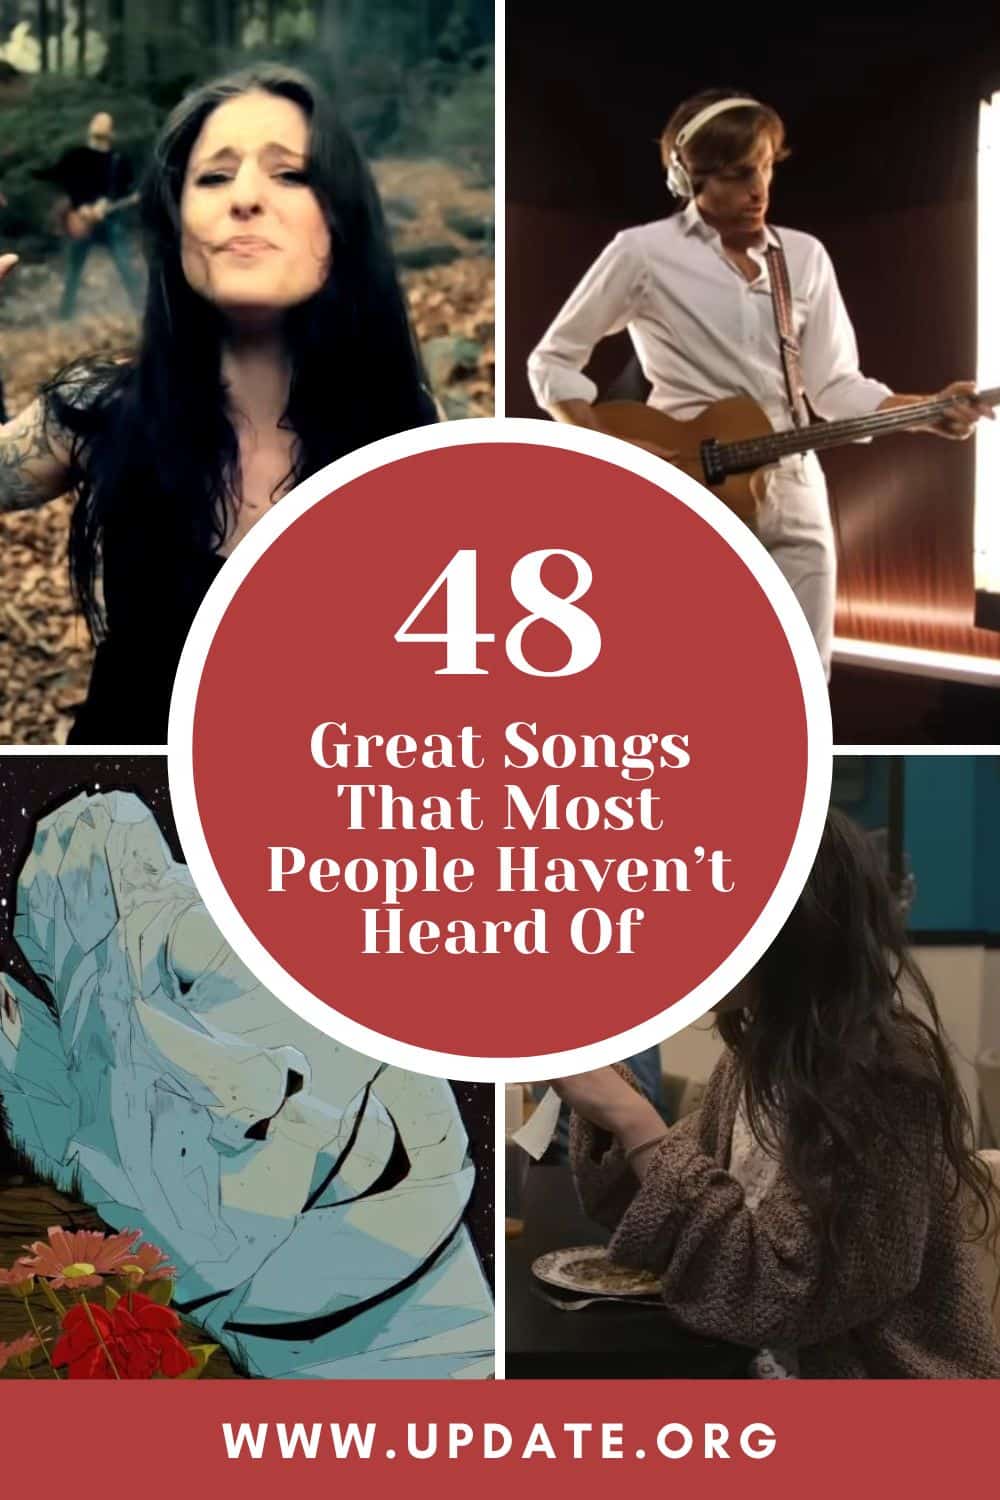 48 Great Songs That Most People Haven’t Heard Of pinterest image.